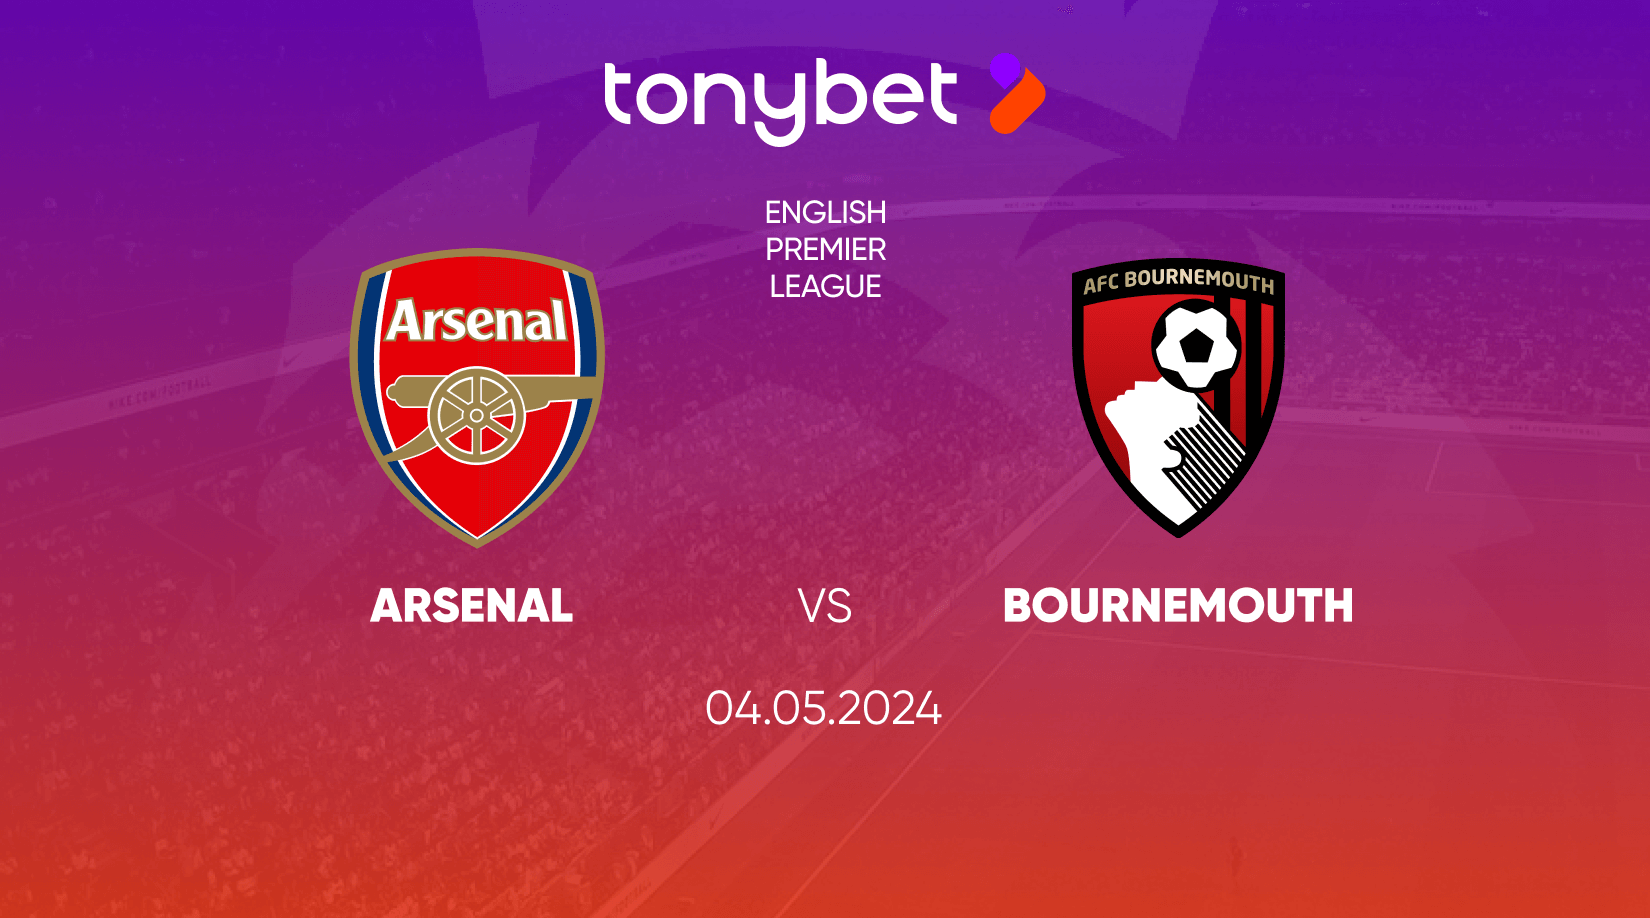 Arsenal FC vs Bournemouth, Prediction, Odds and Betting Tips 04/05/2024